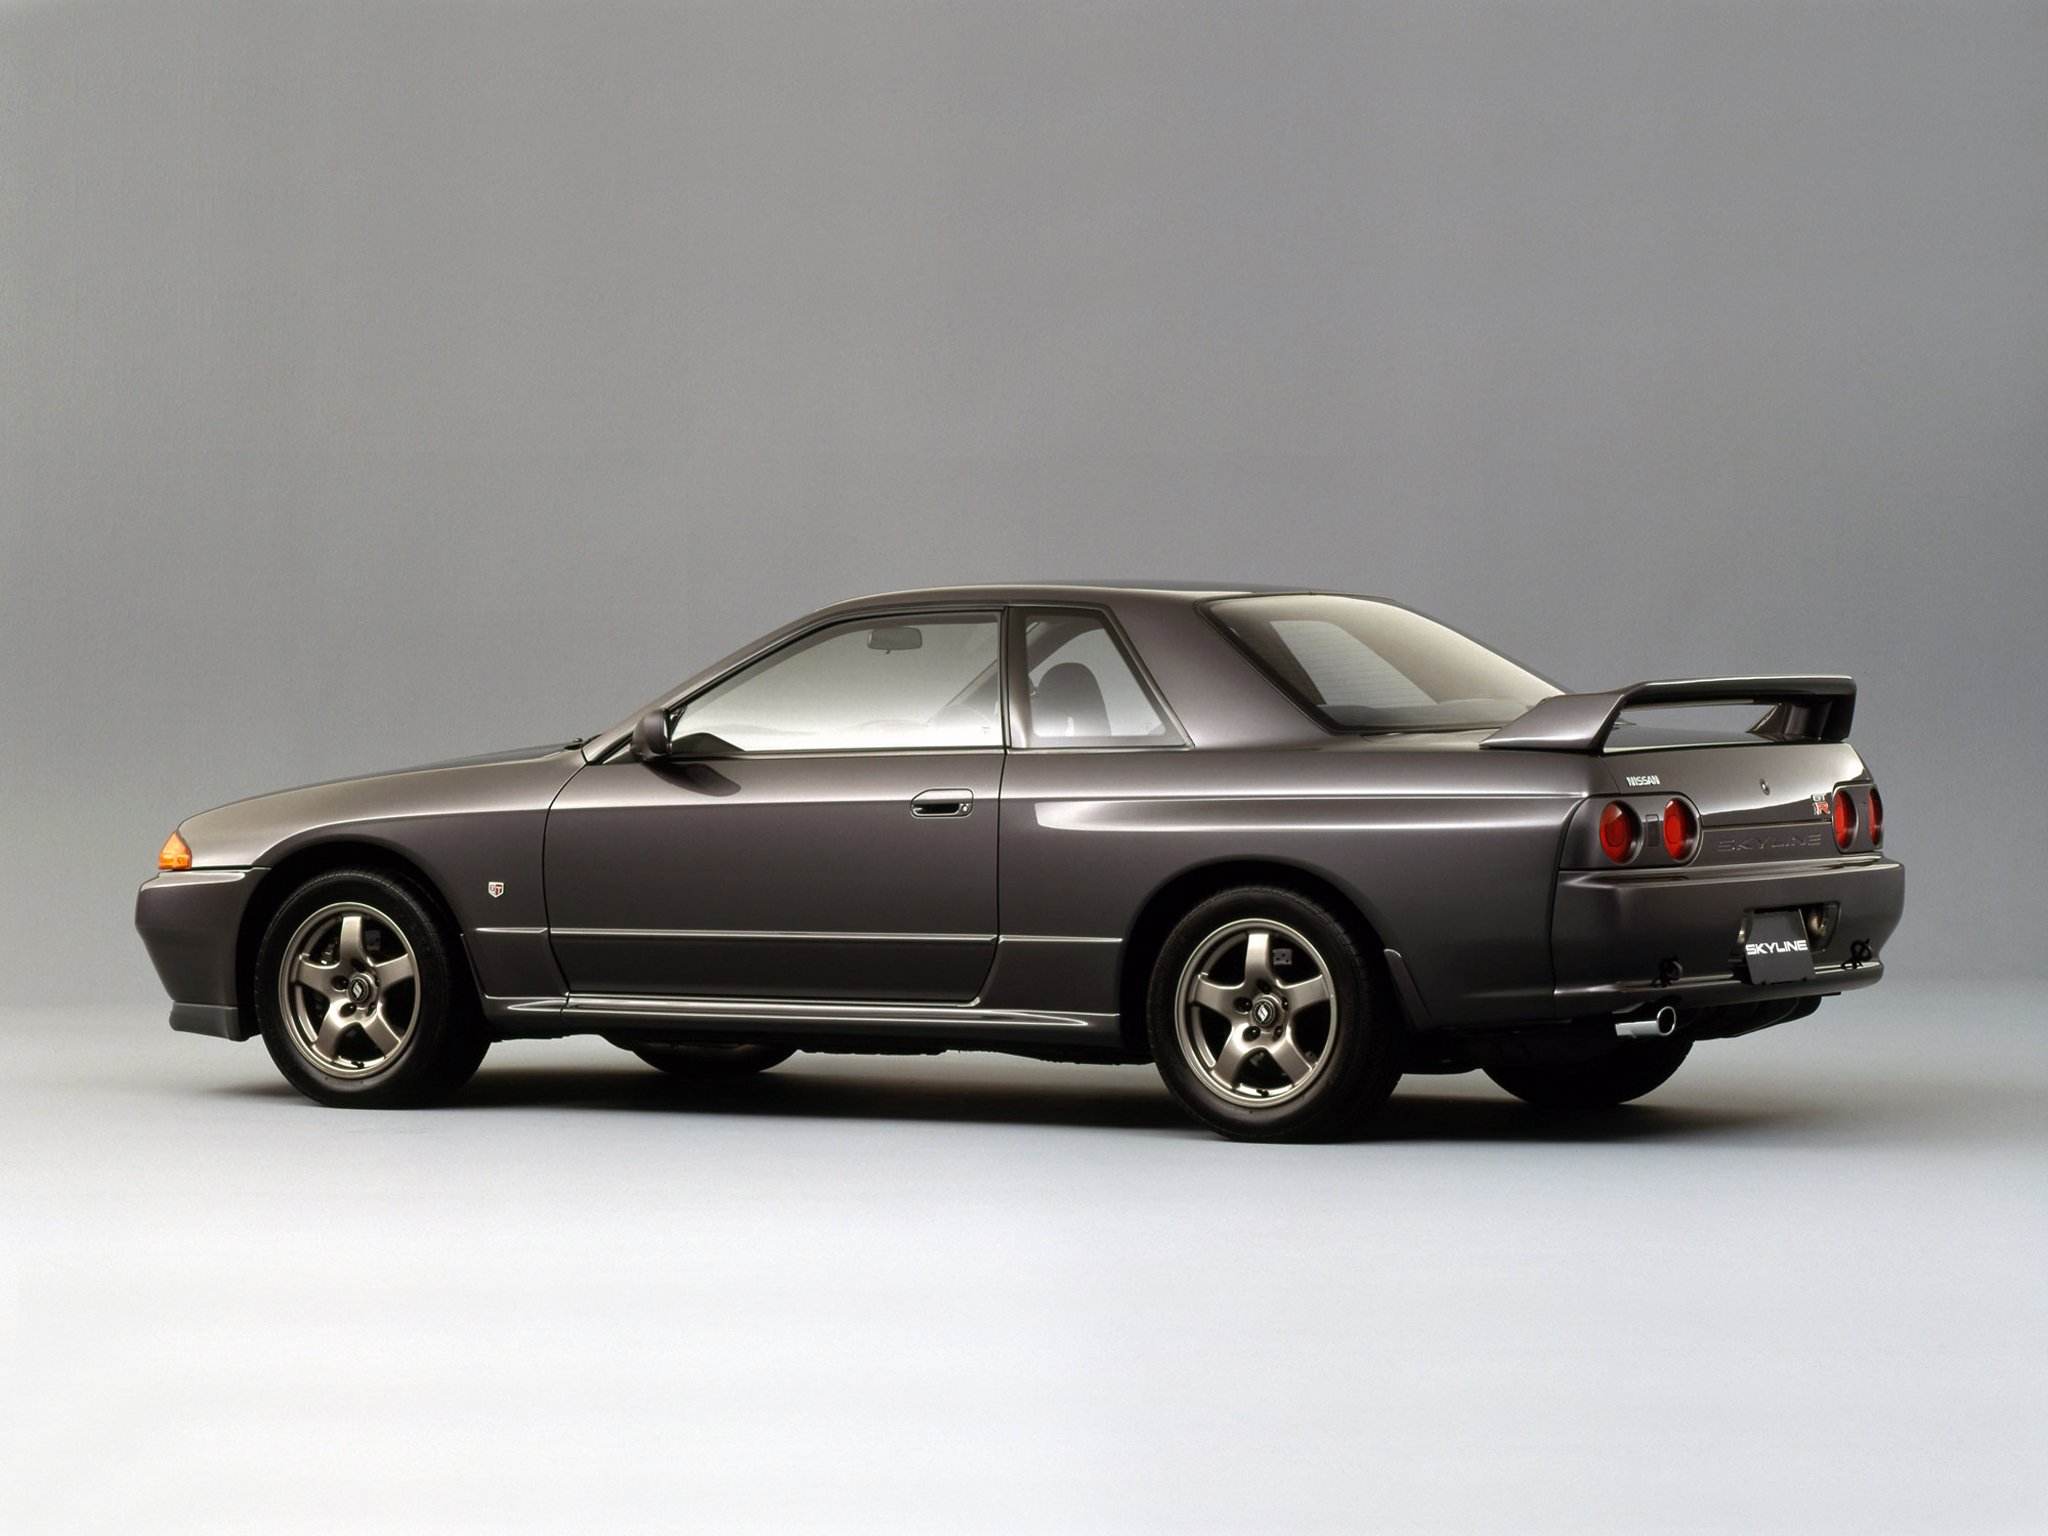 nissan, Skyline, Gt r, 1989, Coupe, Cars Wallpaper